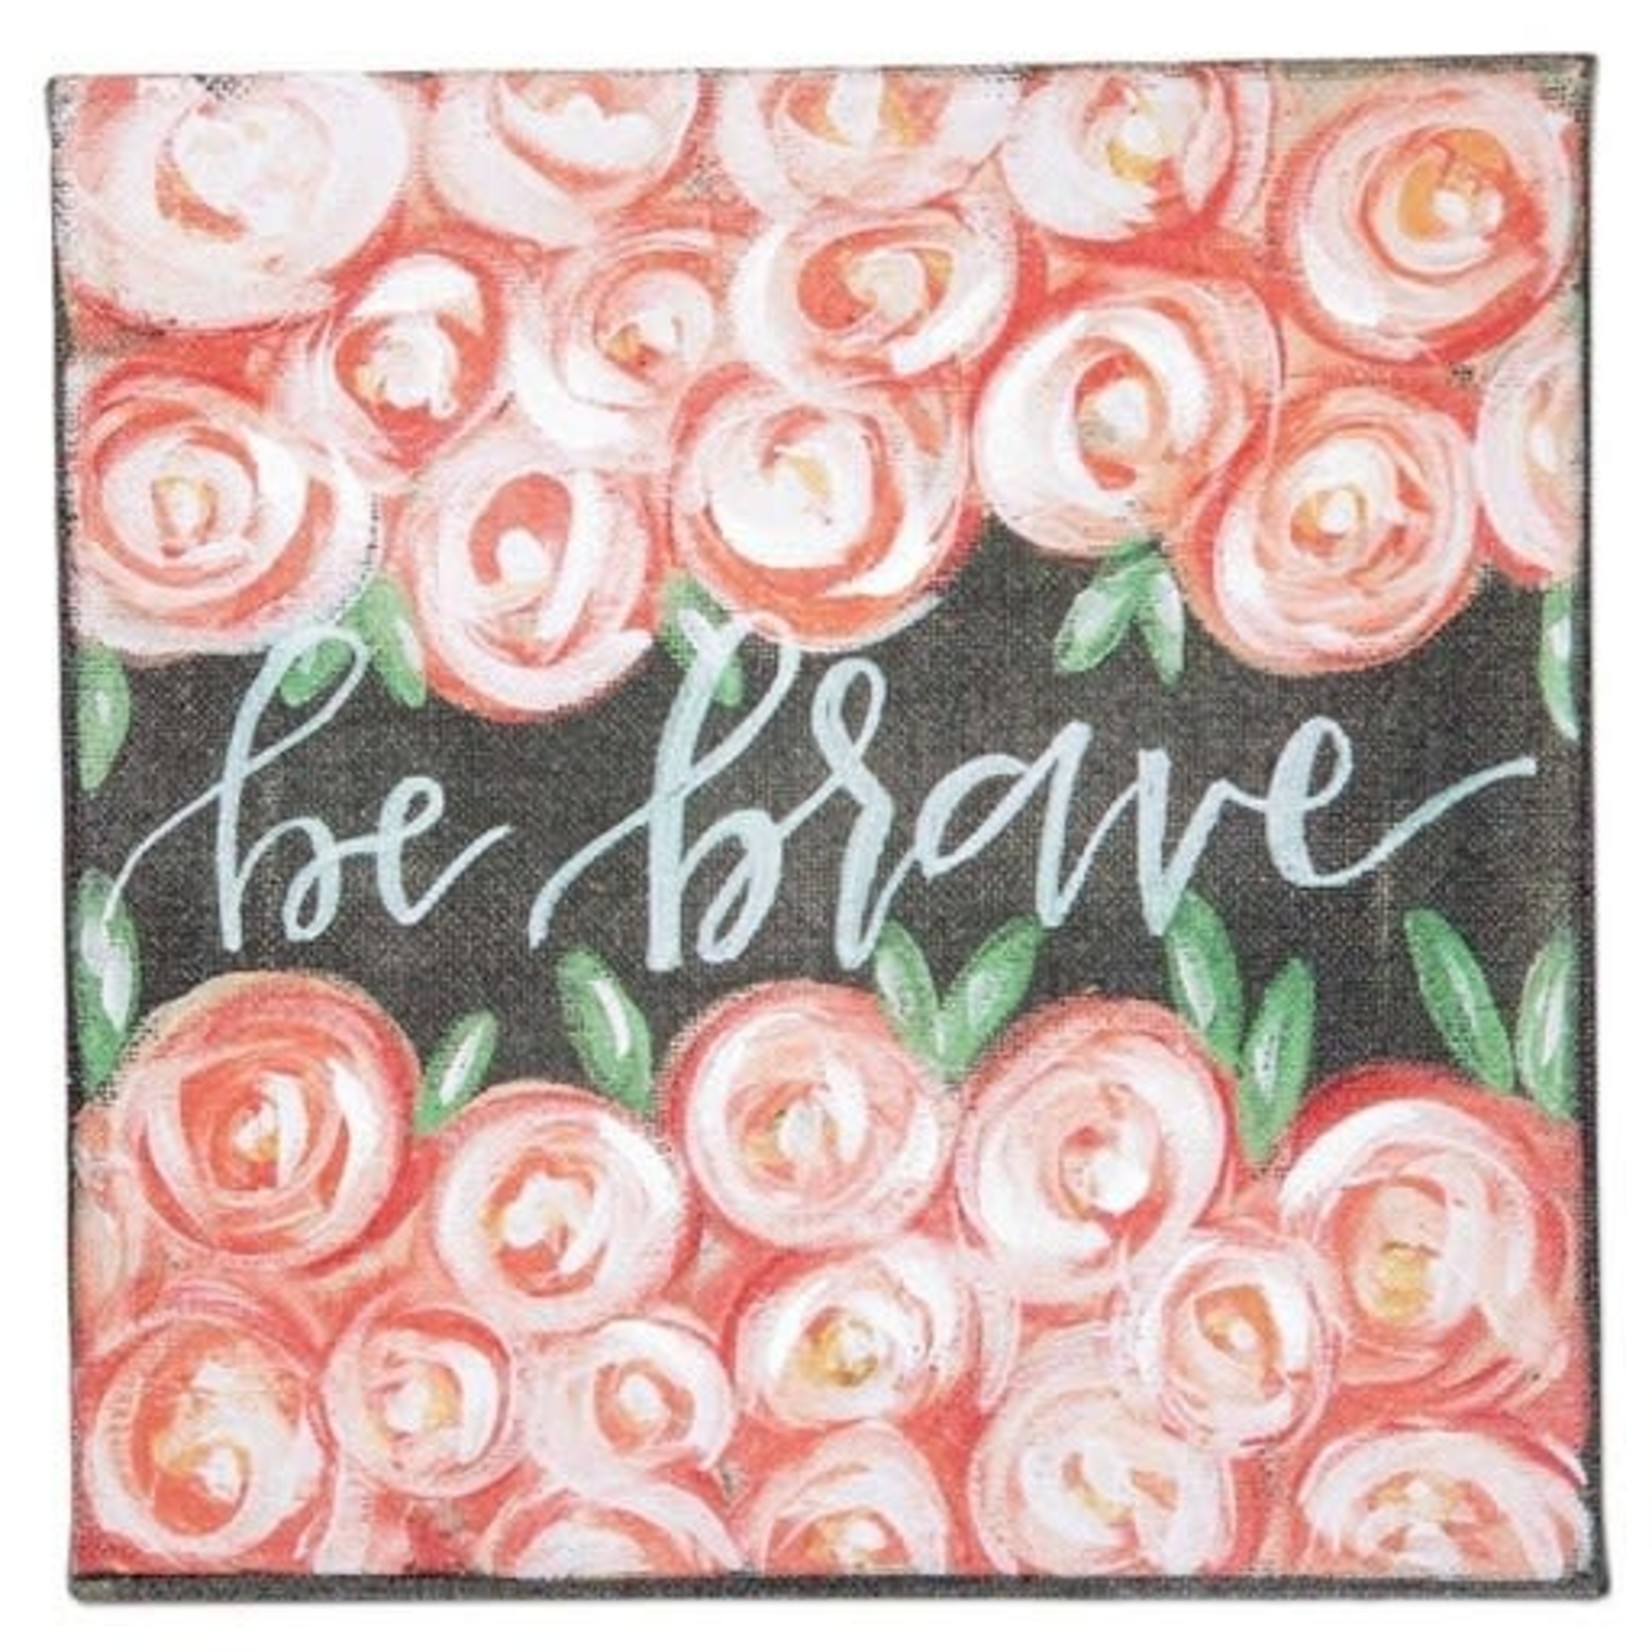 Be brave canvas sign